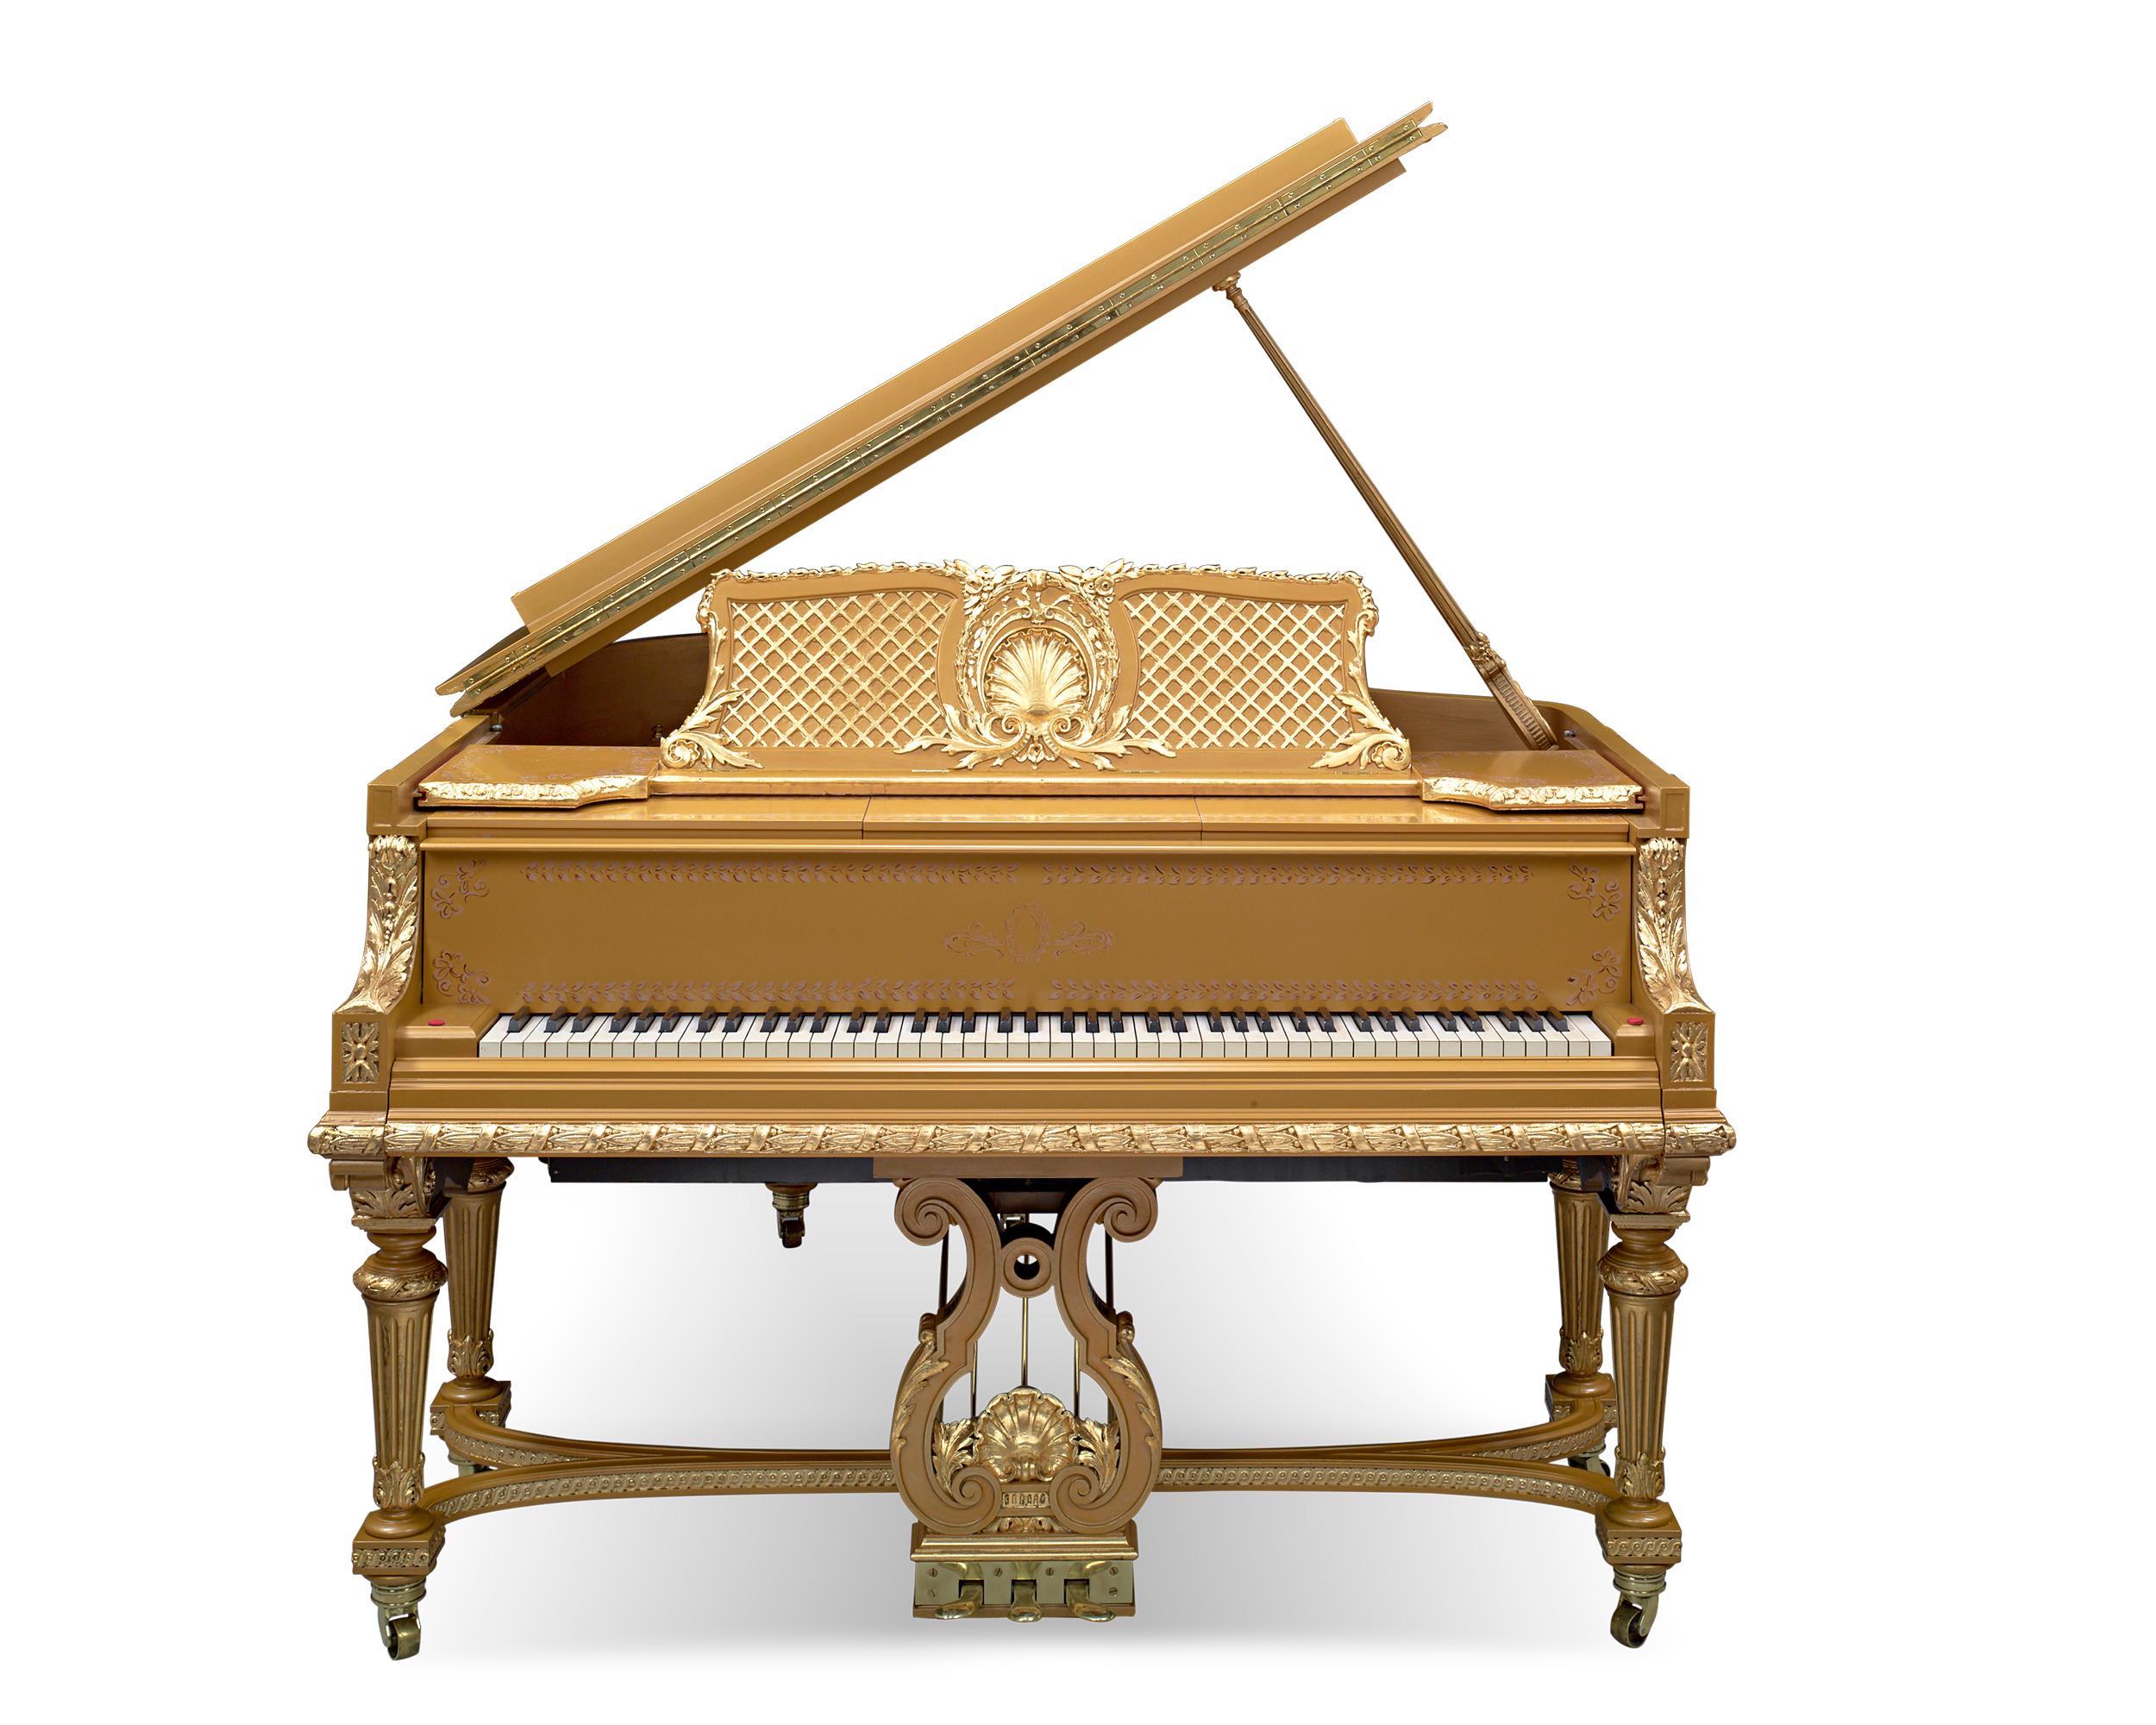 Immensely rare, mechanically complex and visually stunning, this Steinway & Sons reproducing grand piano is considered to be the highest quality player piano made in the early 20th century. This particular instrument is further distinguished as